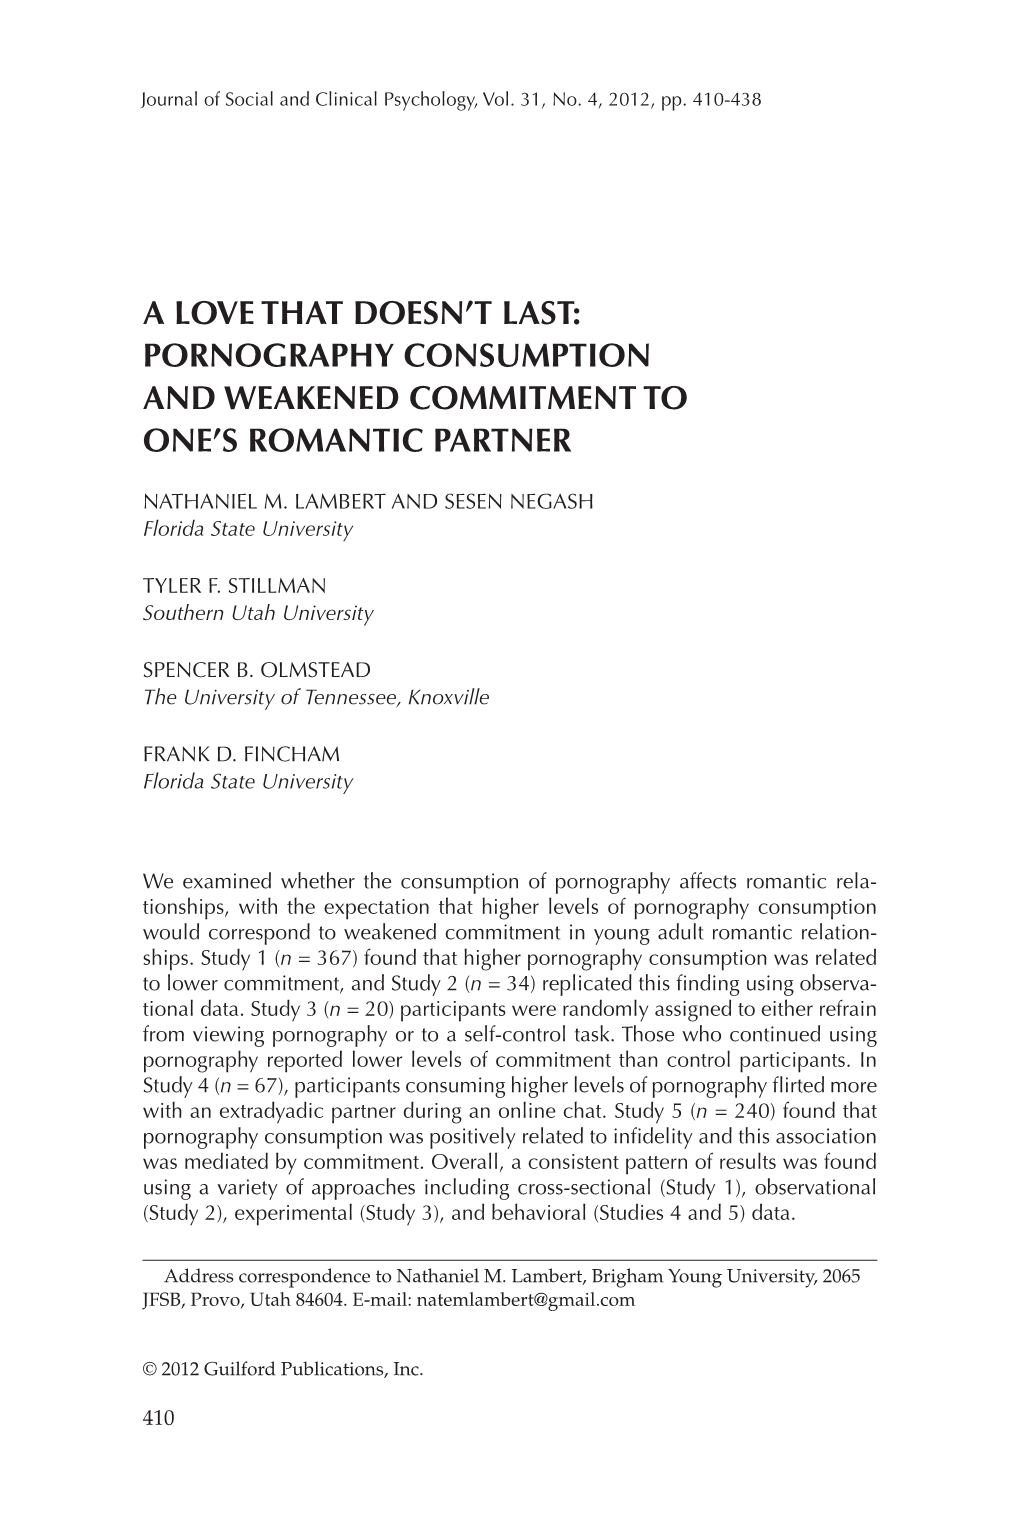 A Love That Doesn't Last: Pornography Consumption and Weakened Commitment to One's Romantic Partner